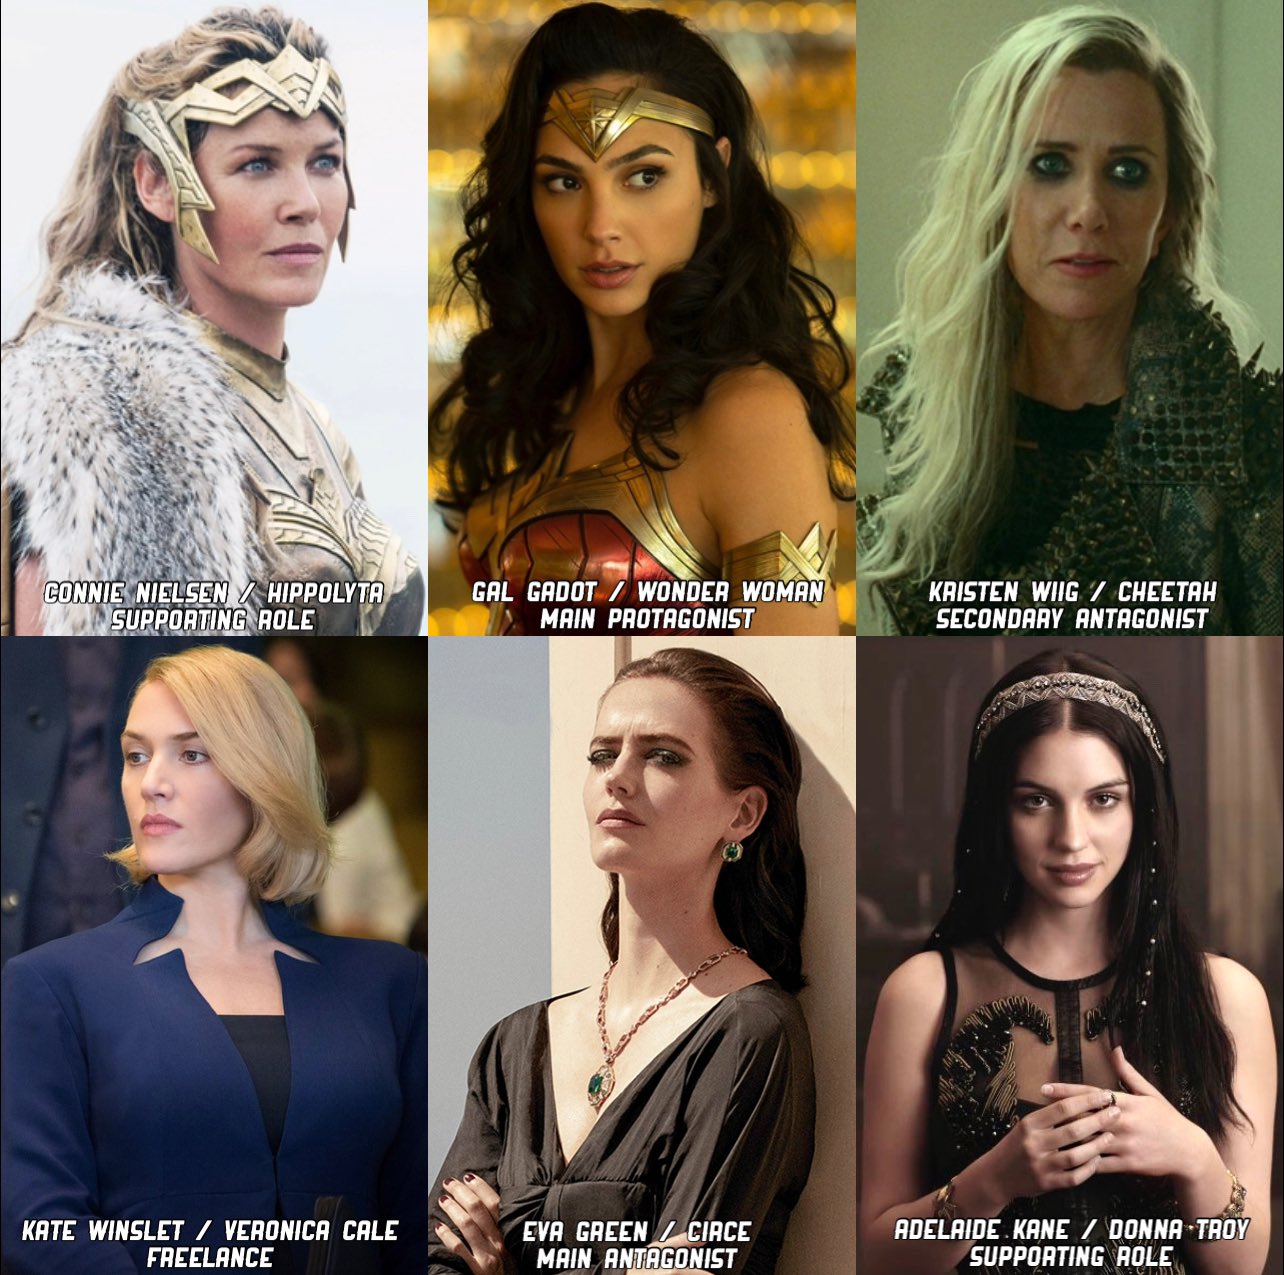 Wonder Woman': A Conversation With The Cast & Director Of The Film